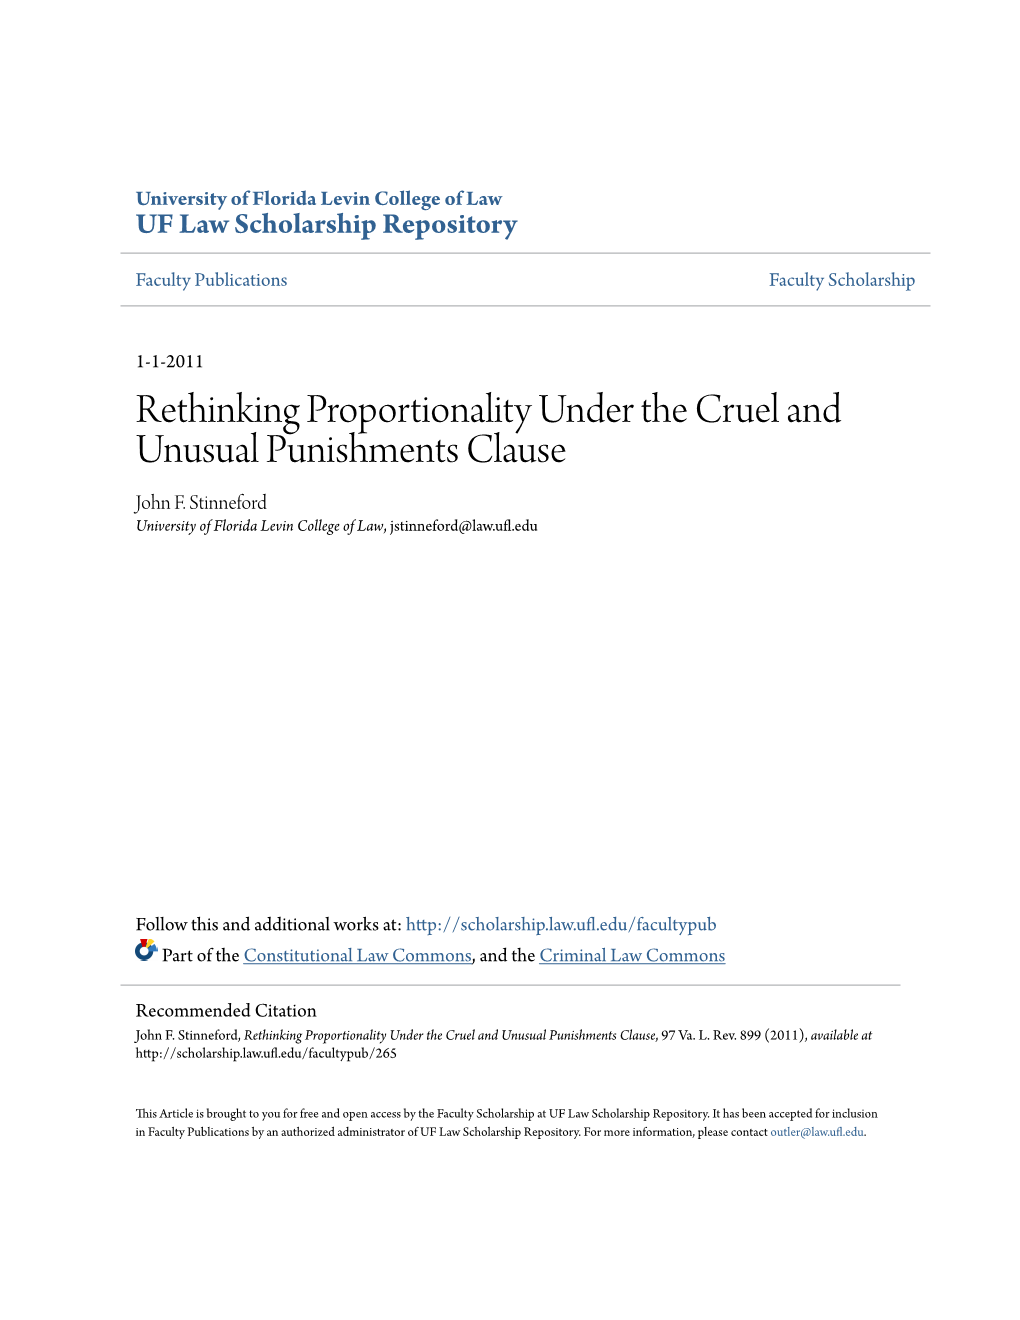 Rethinking Proportionality Under the Cruel and Unusual Punishments Clause John F